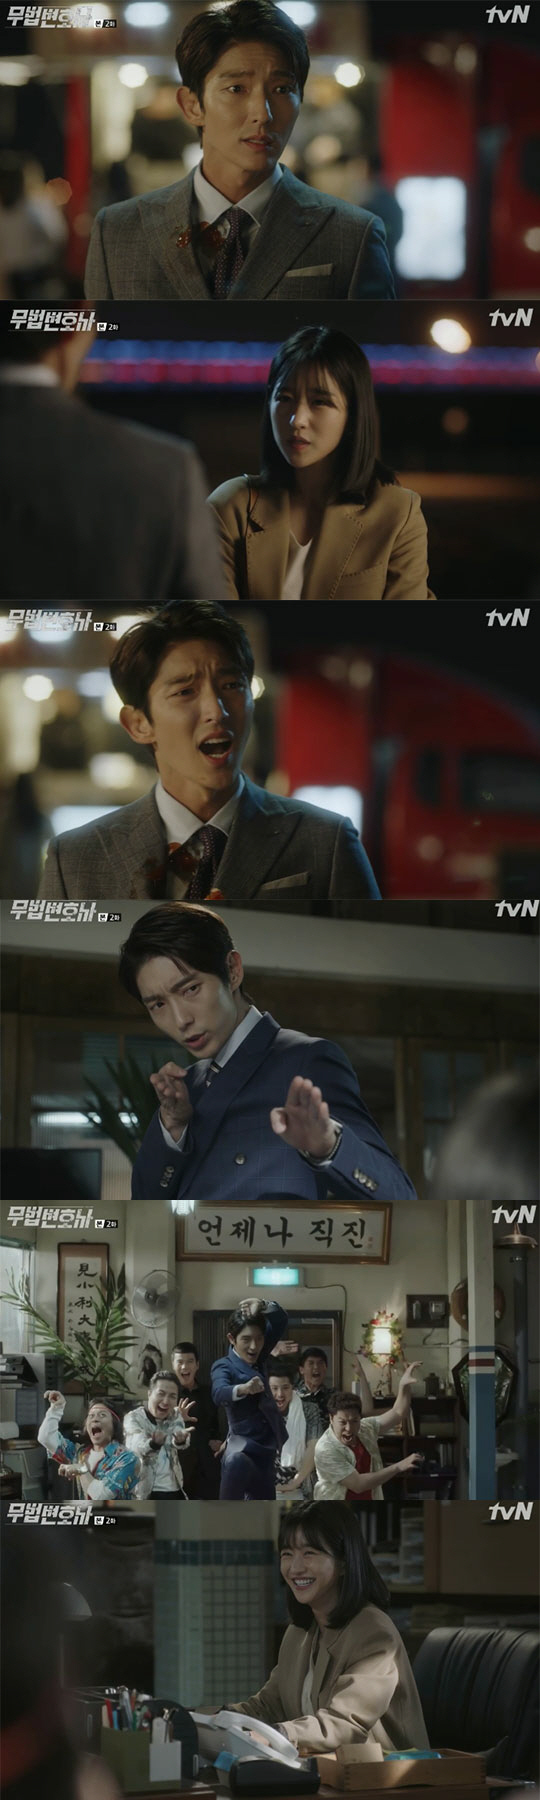 Lawless Lawyer Lee Joon-gi declared himself a lawless (law) lawyer for his identityOn the 13th, TVN Lawless Lawyer showed Bong Sang-pil (Lee Joon-gi) and Ha Jae-i (Seo Ye-ji) starting to breathe as lawyers and secretaries.On the day, Bong Sang-pil said, If you win, you can lose a lotto, he laughed, expressing his intention to take away the mayoral murder of Lee Dae-yeon.Lee Jae-jae rubbed a hamburger on Bong Sang-pils suit and said, Who is more trash among the lawyers like Detective and you who killed the market?However, Bong Sang-pil said, An ex-lawyer who judges a defendant who has not been judged as his own standard?Bong Sang-pil then claims Ha Jae-yi for washing clothes, saying that he is an Italian luxury suit, while Lawyer law 1 trillion 1 is at the foot.You are not a Lawyer law, Bong said in Ha Jae-yis response, The lawyer is self-employed, not protected like a doctor.In lawless, well suited, said Bong Sang-pil, stressing, Its not nothing but nothing to fight, and the lawyer is a person who fights by law.